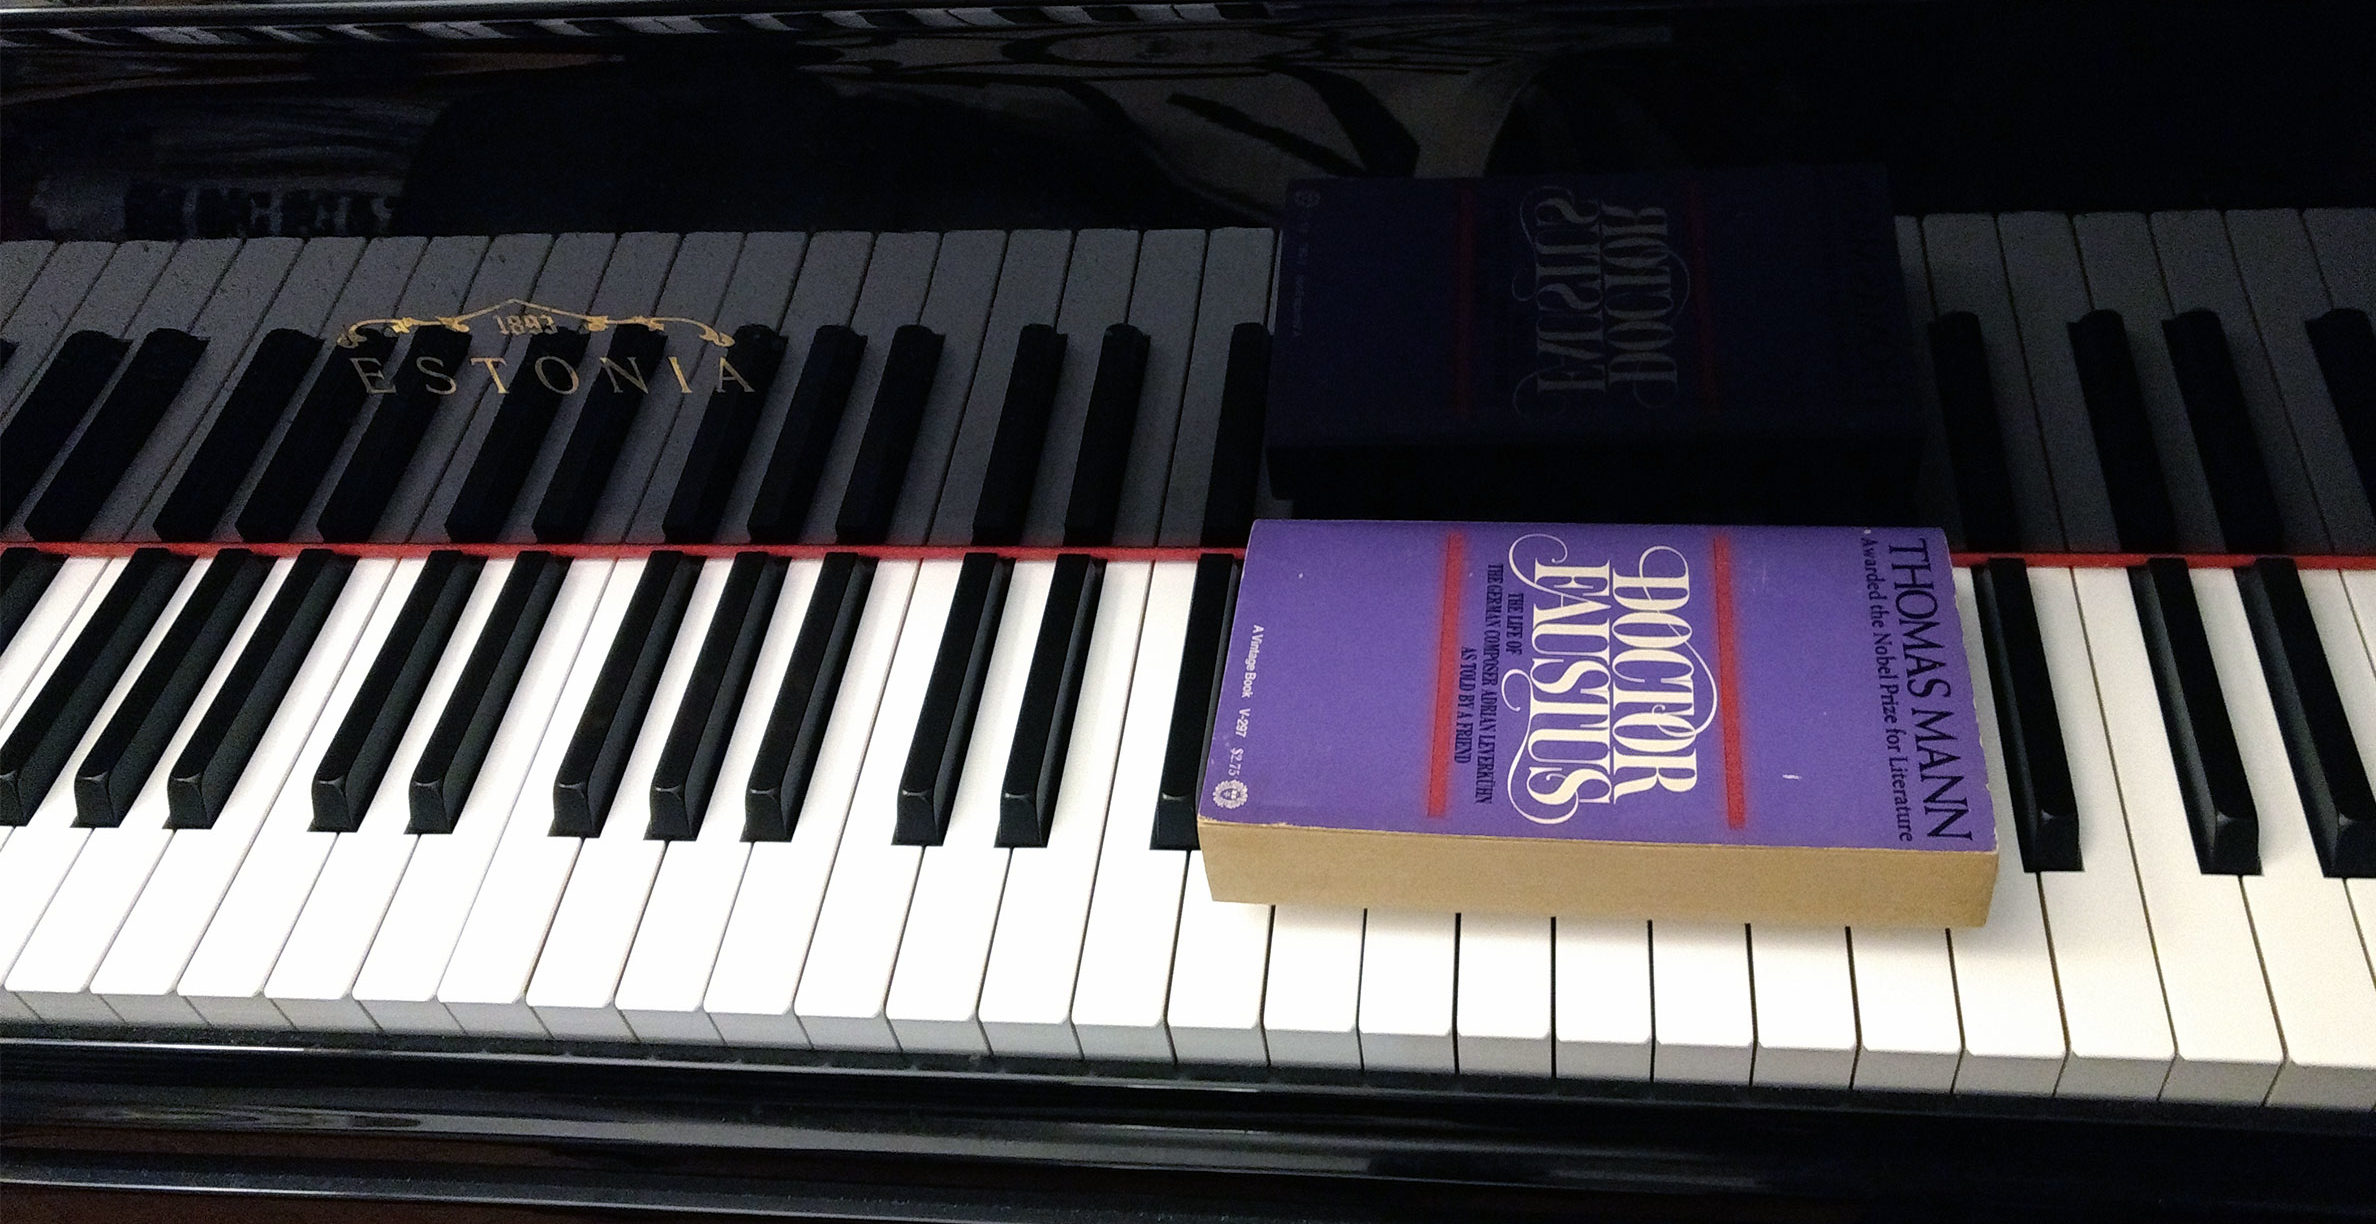 A paperback copy of an English translation of Thomas Mann's novel Doctor Faustus resting atop the keys of a piano.